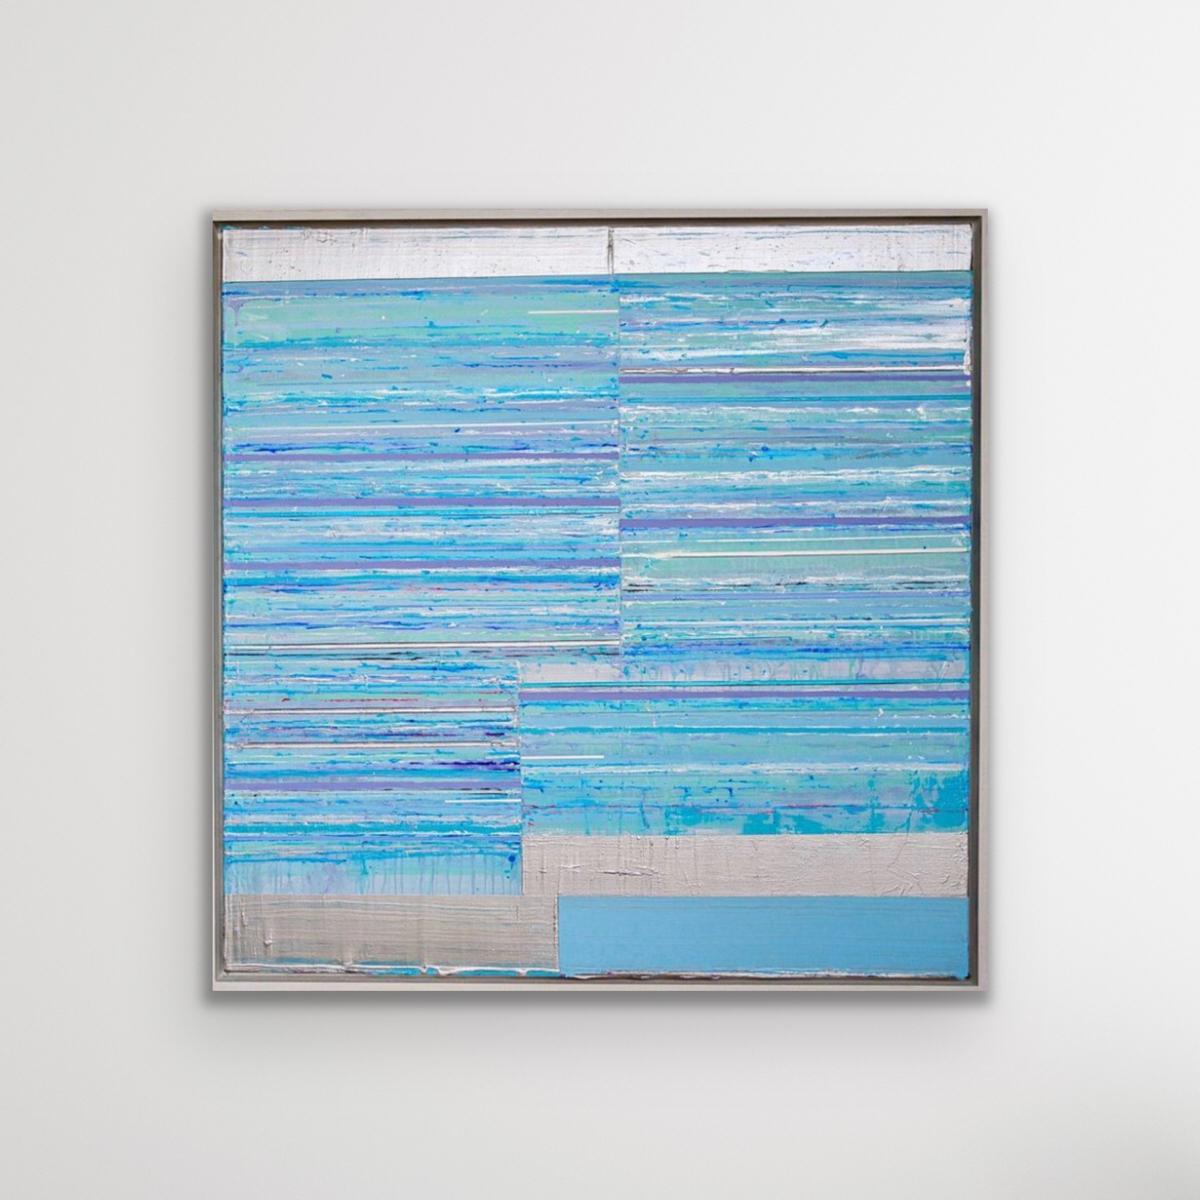 Aequor Infinitum - Blue, turquoise, white and silver striped abstract painting - Painting by Mark Zimmermann